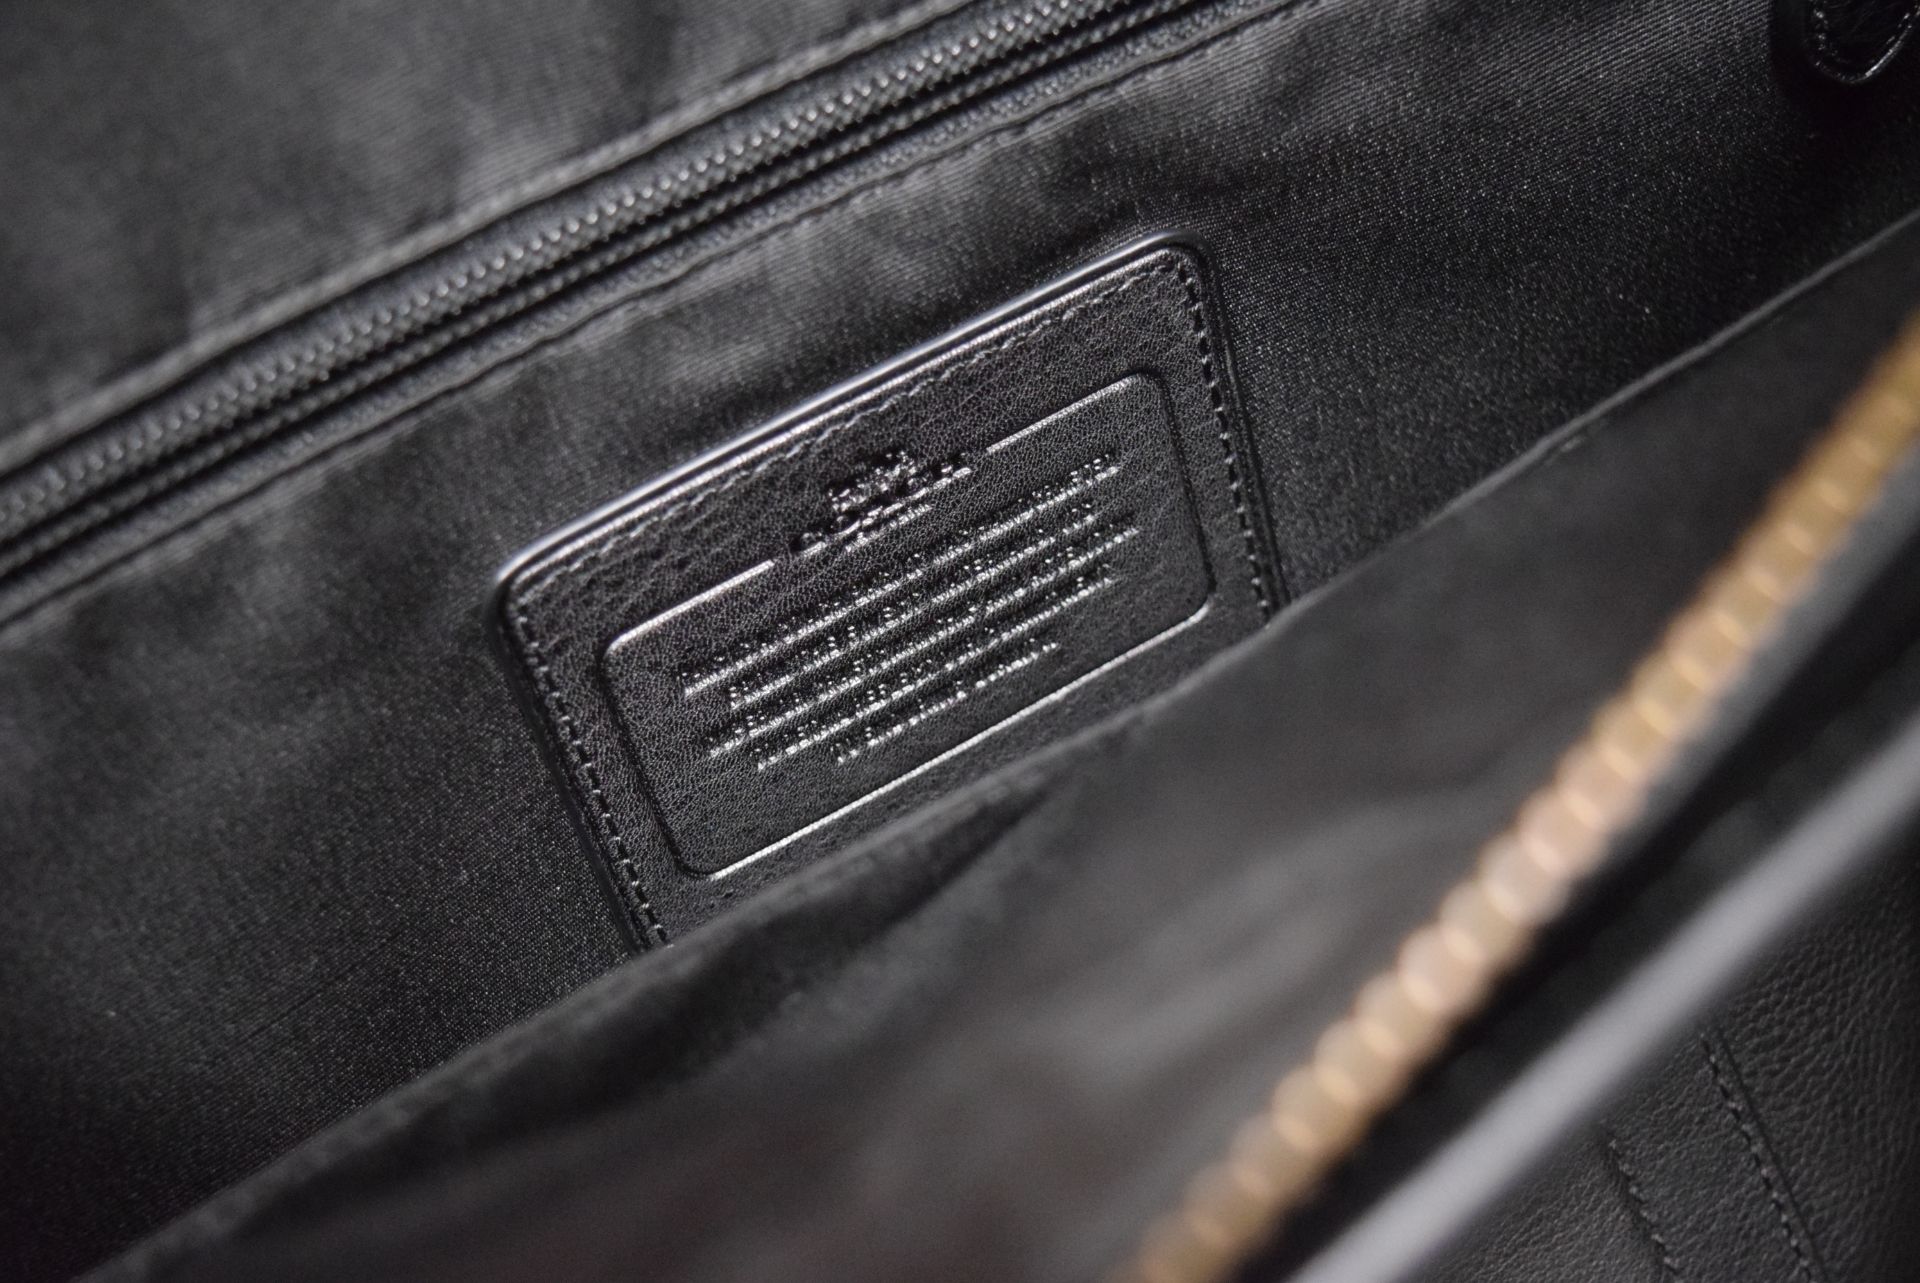 COACH NEW YORK BLACK LEATHER/ BRASS LAPTOP / DOCUMENT BAG (HOLDALL) - AS NEW WITH COACH LEATHER TAG - Image 5 of 7